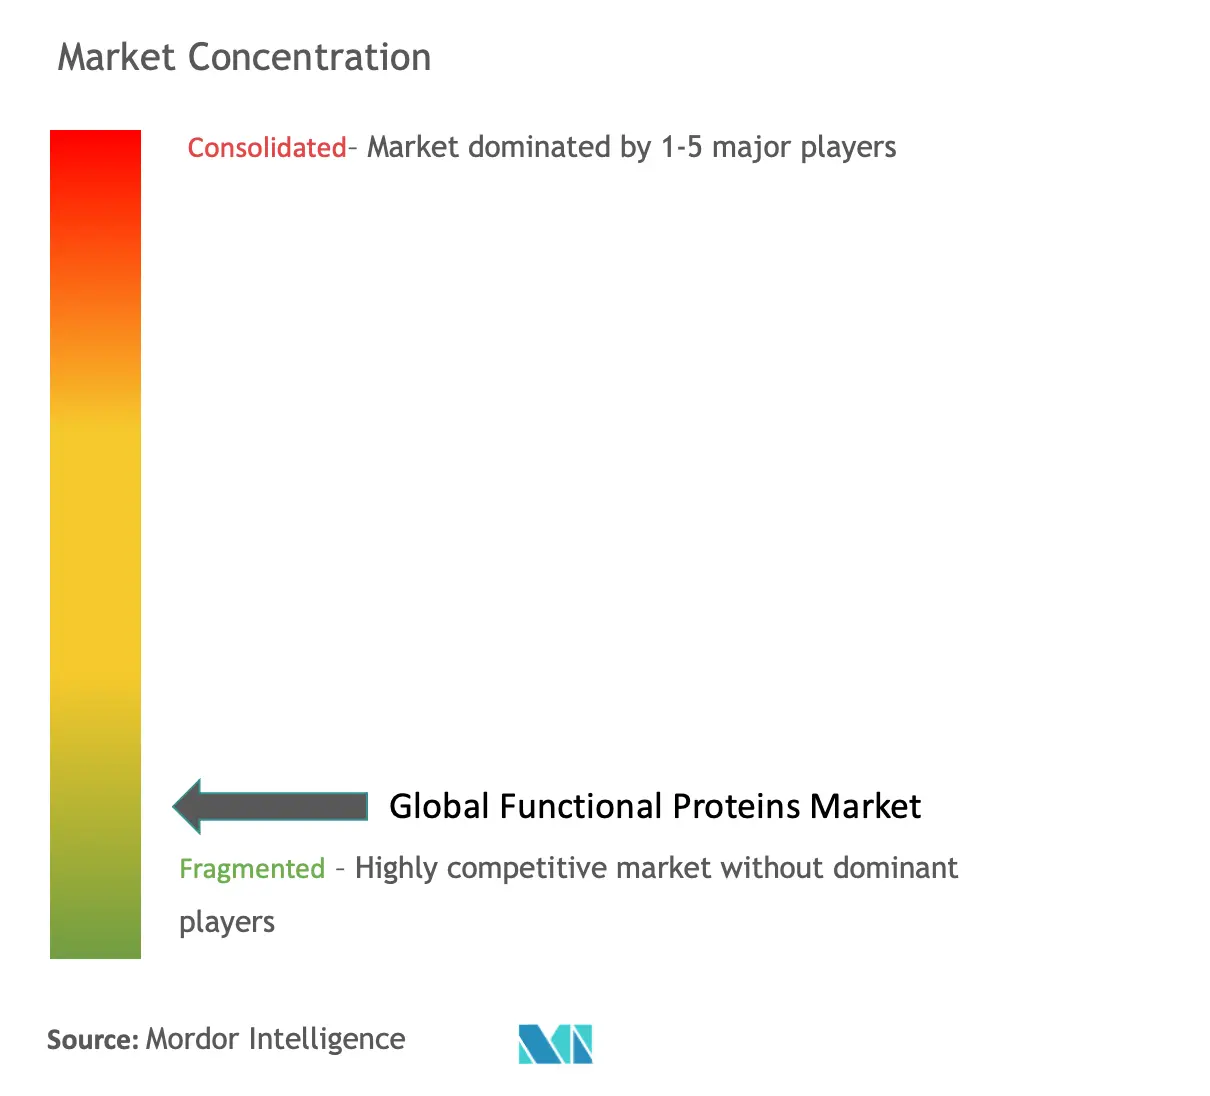 Functional Proteins Market Concentration